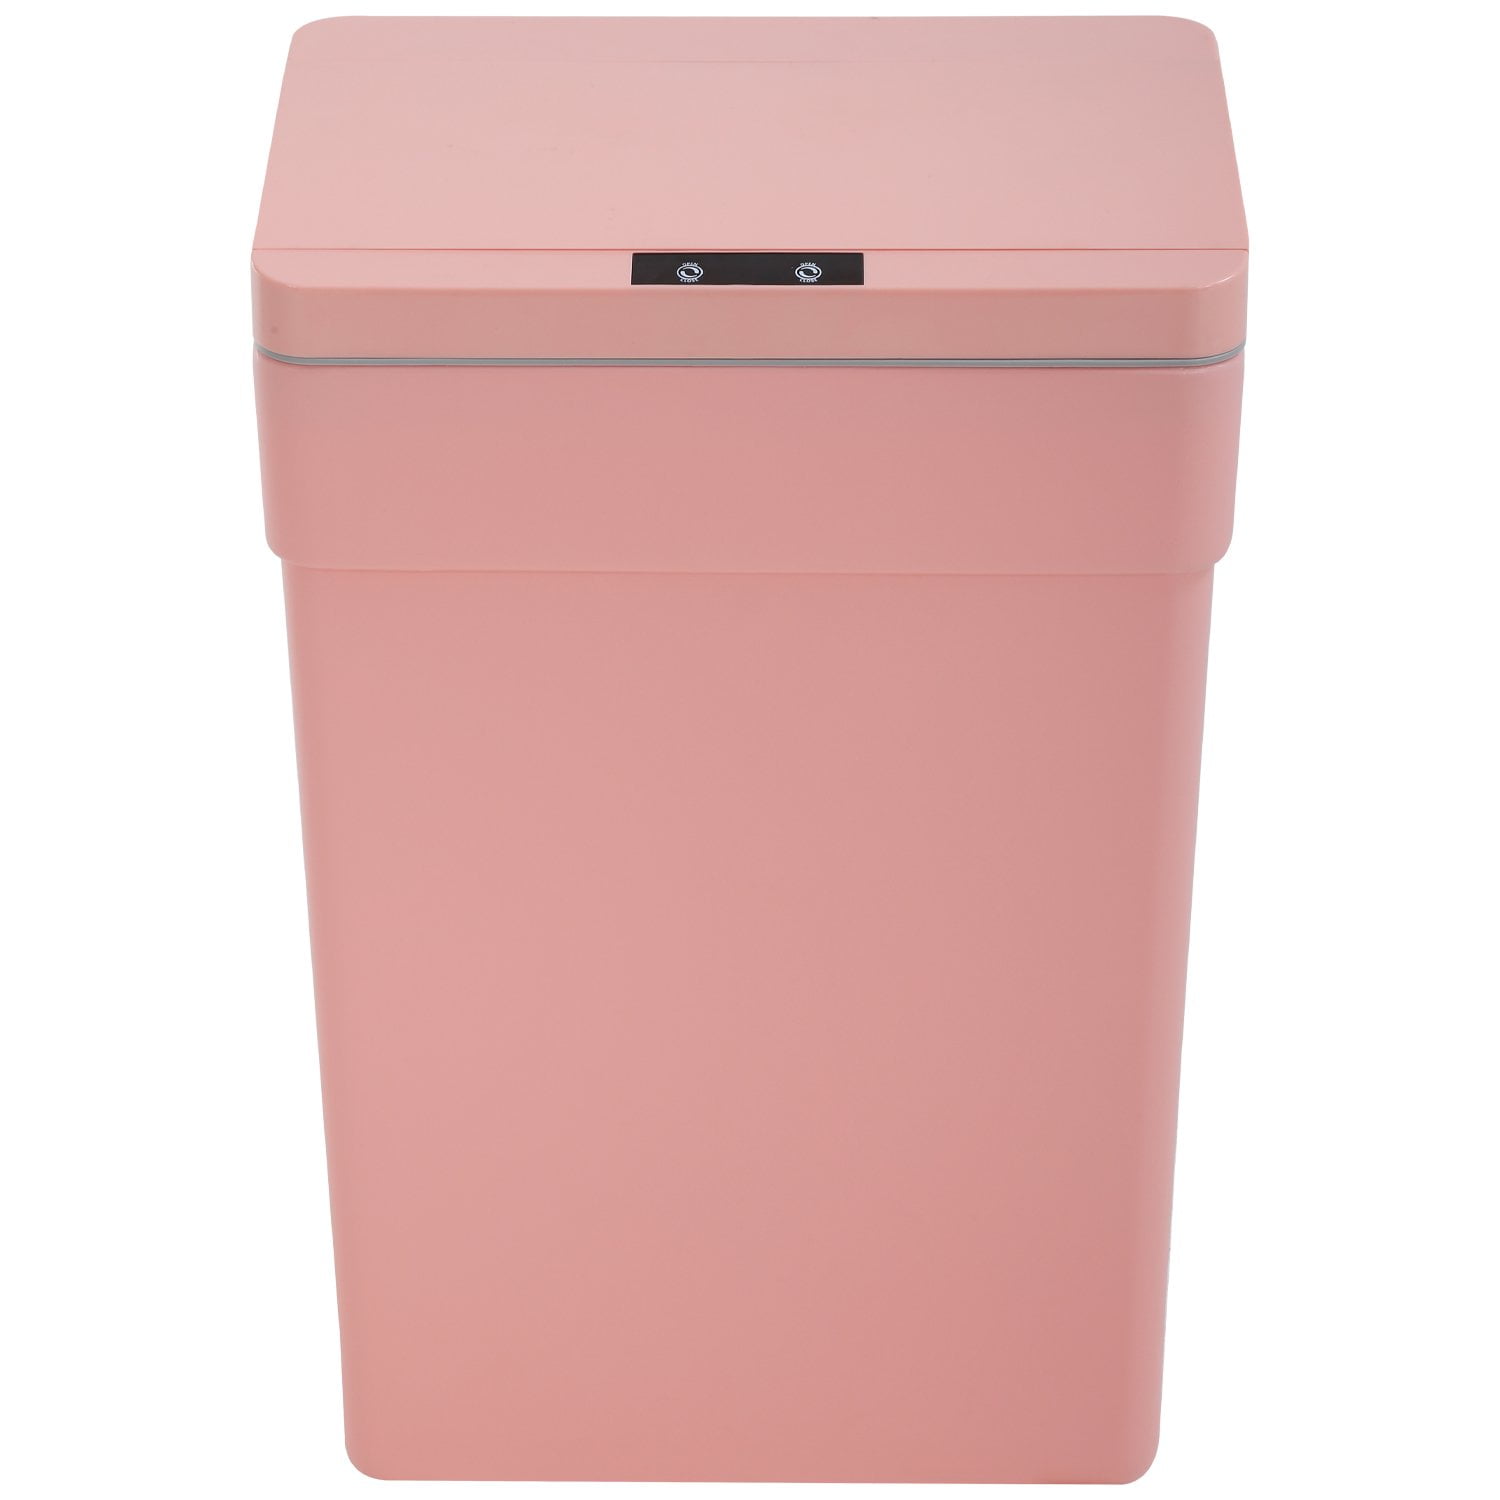  TTY Store 13 Gallon Blue Touchless Trash Can with Lid, 50L  Capacity, Electronic Motion Sensor, Polypropylene Material, Hand-Free  Operation : Industrial & Scientific